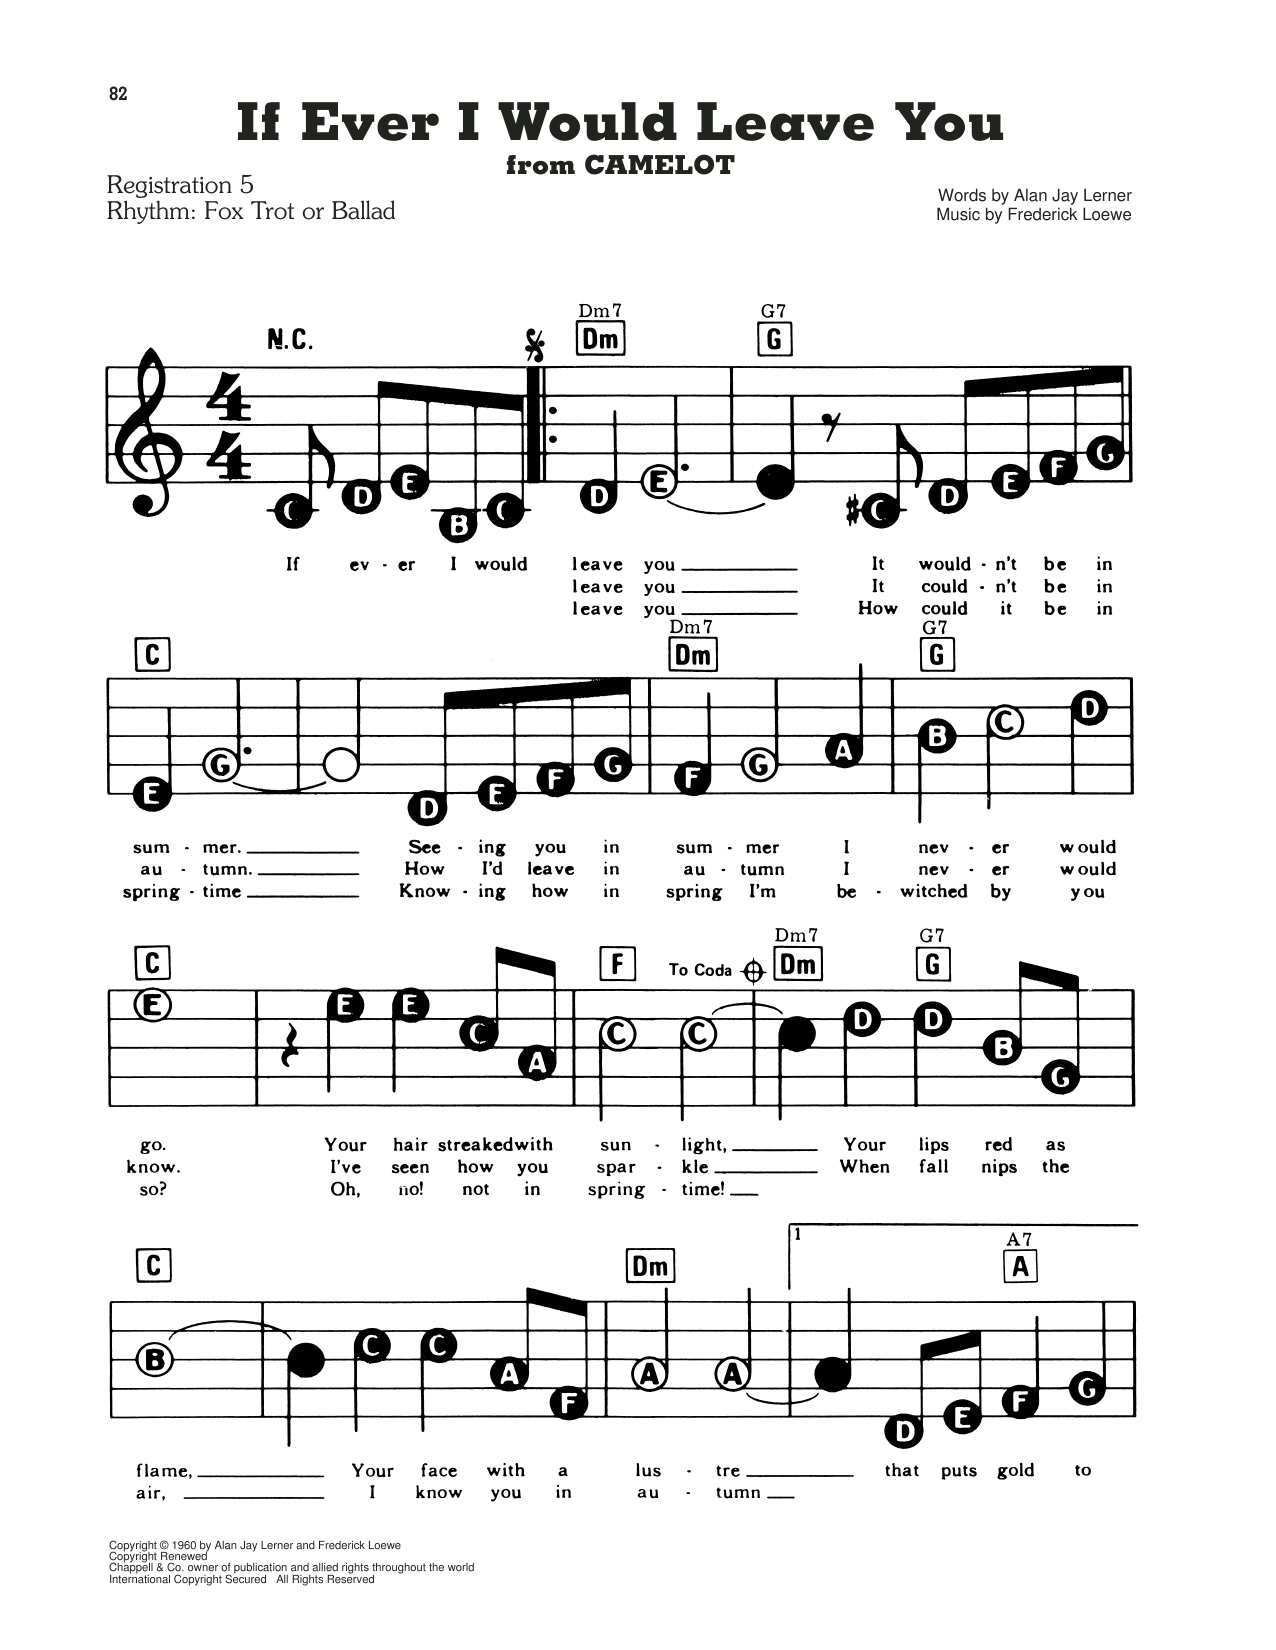 Lerner & Loewe If Ever I Would Leave You (from Camelot) sheet music preview music notes and score for E-Z Play Today including 2 page(s)